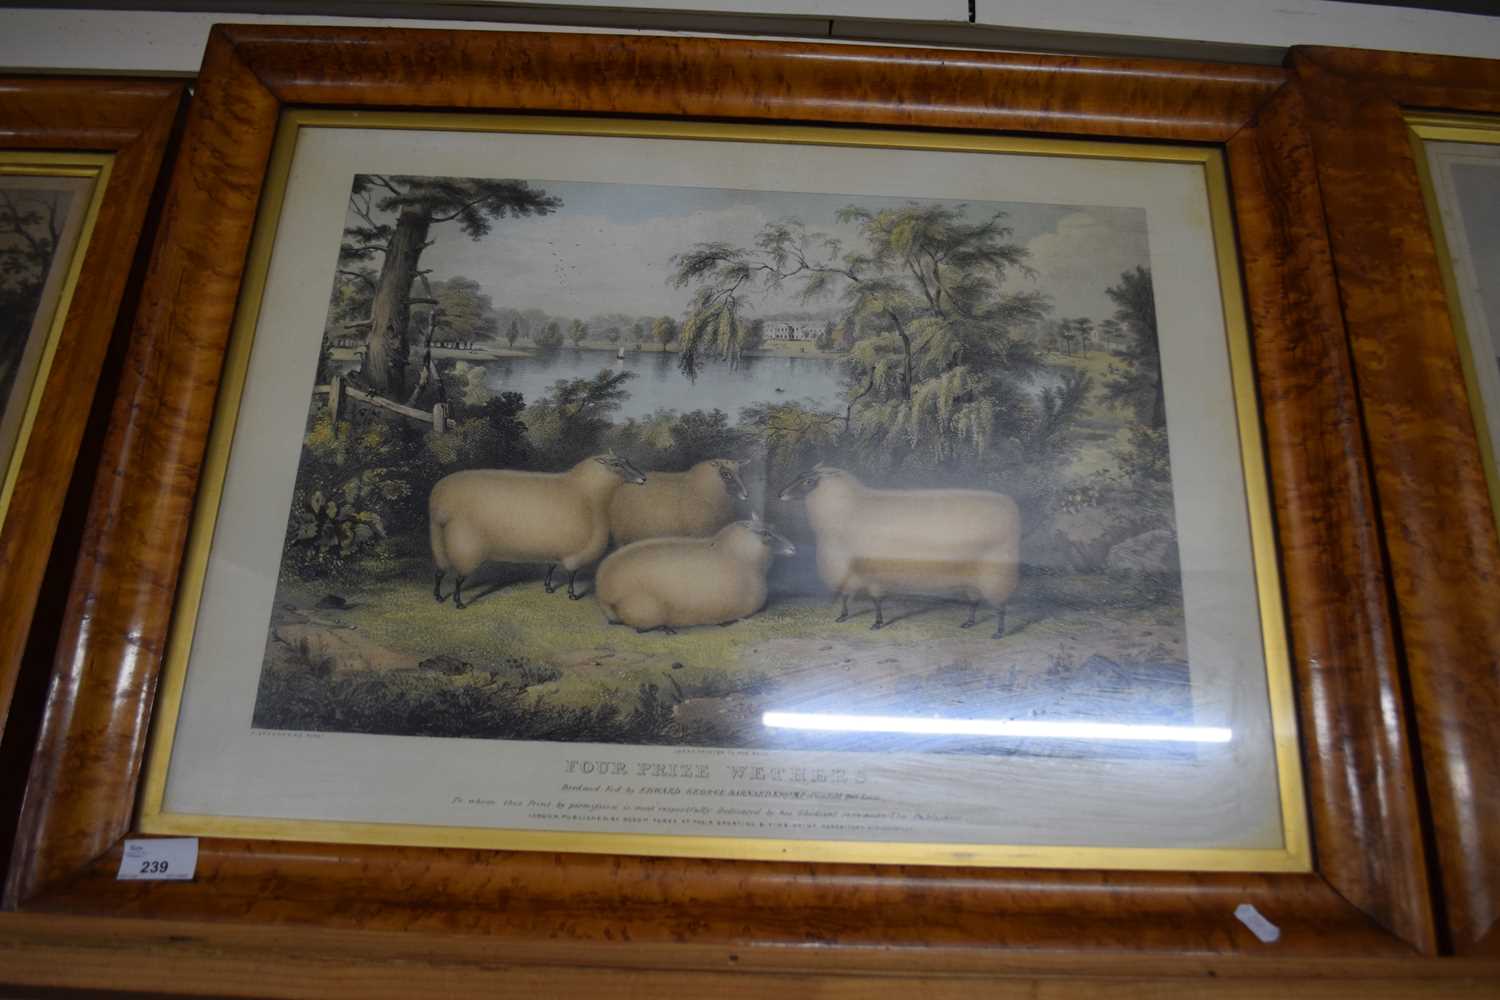 Coloured print of sheep, Four Prize Wethers, set in a maple frame